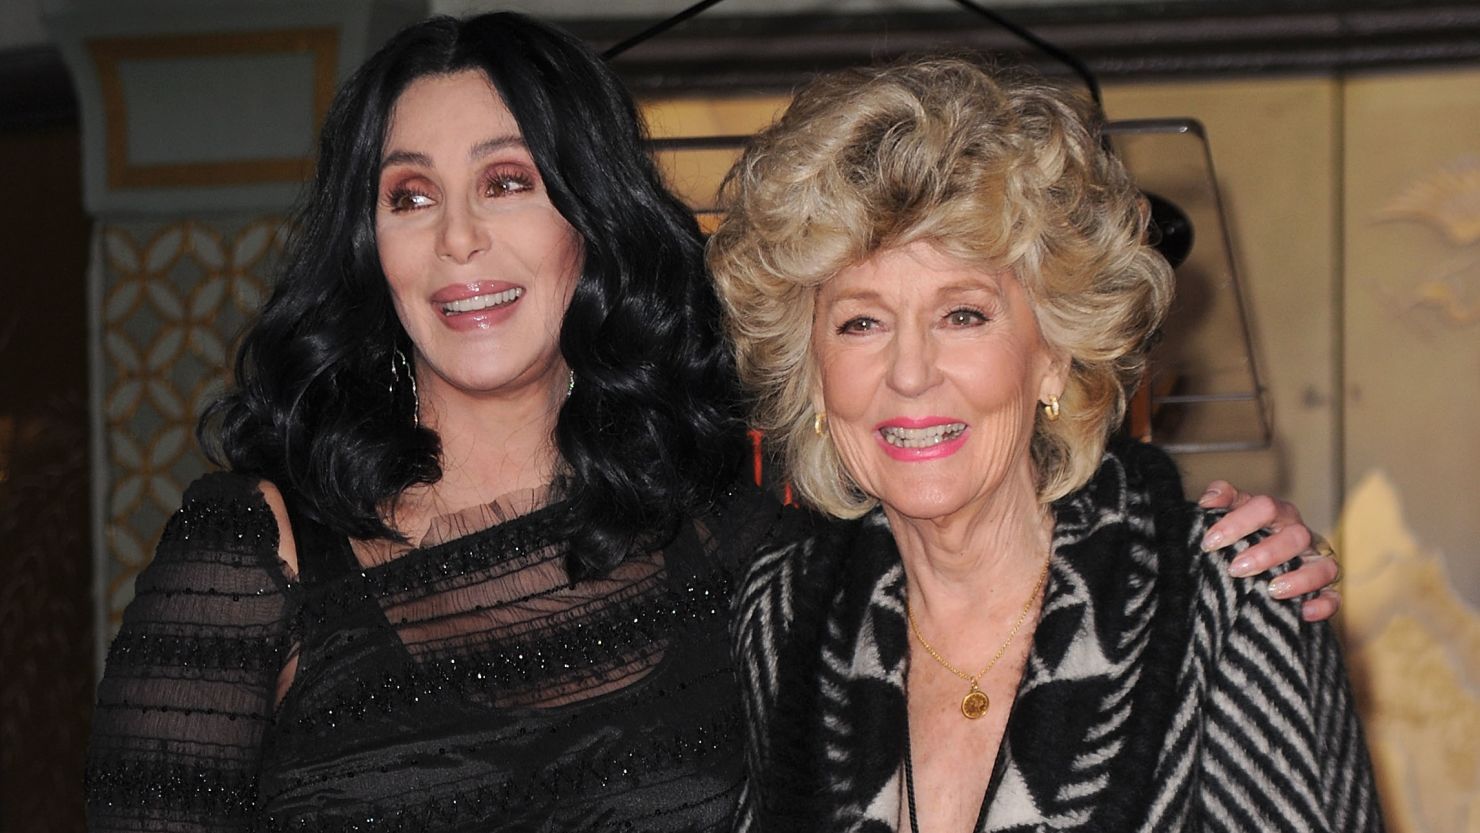 Lifetime's "Dear Mom, Love Cher" focuses on Cher's family history and features interviews with her mom, Georgia Holt.